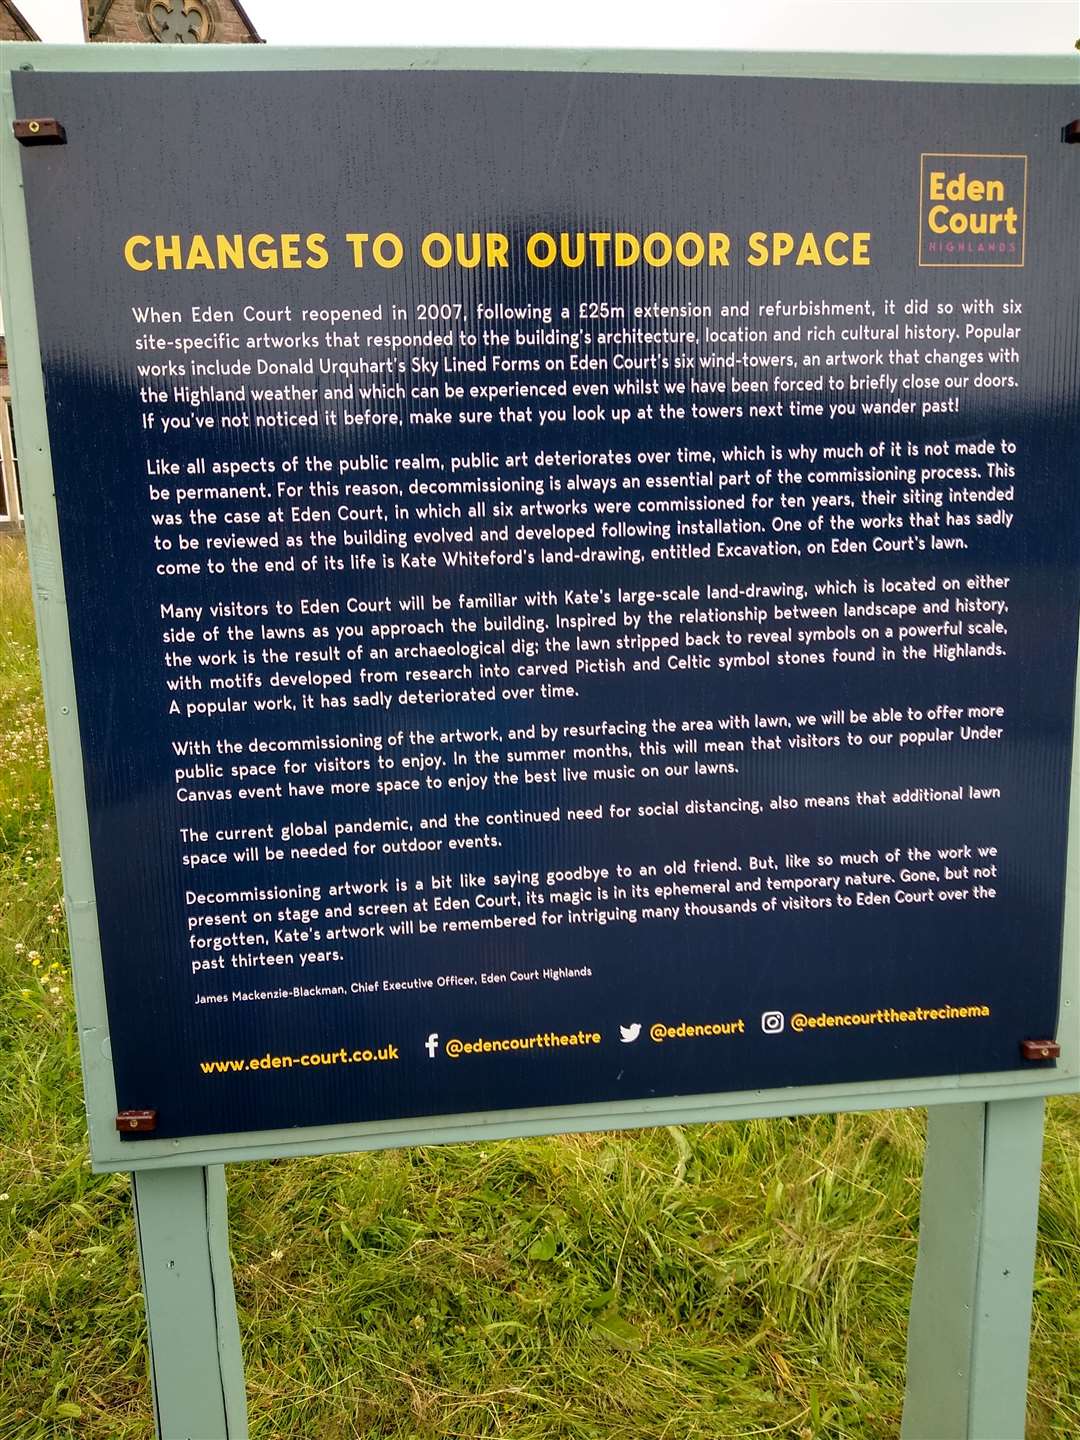 A sign explains why the changes are being made.